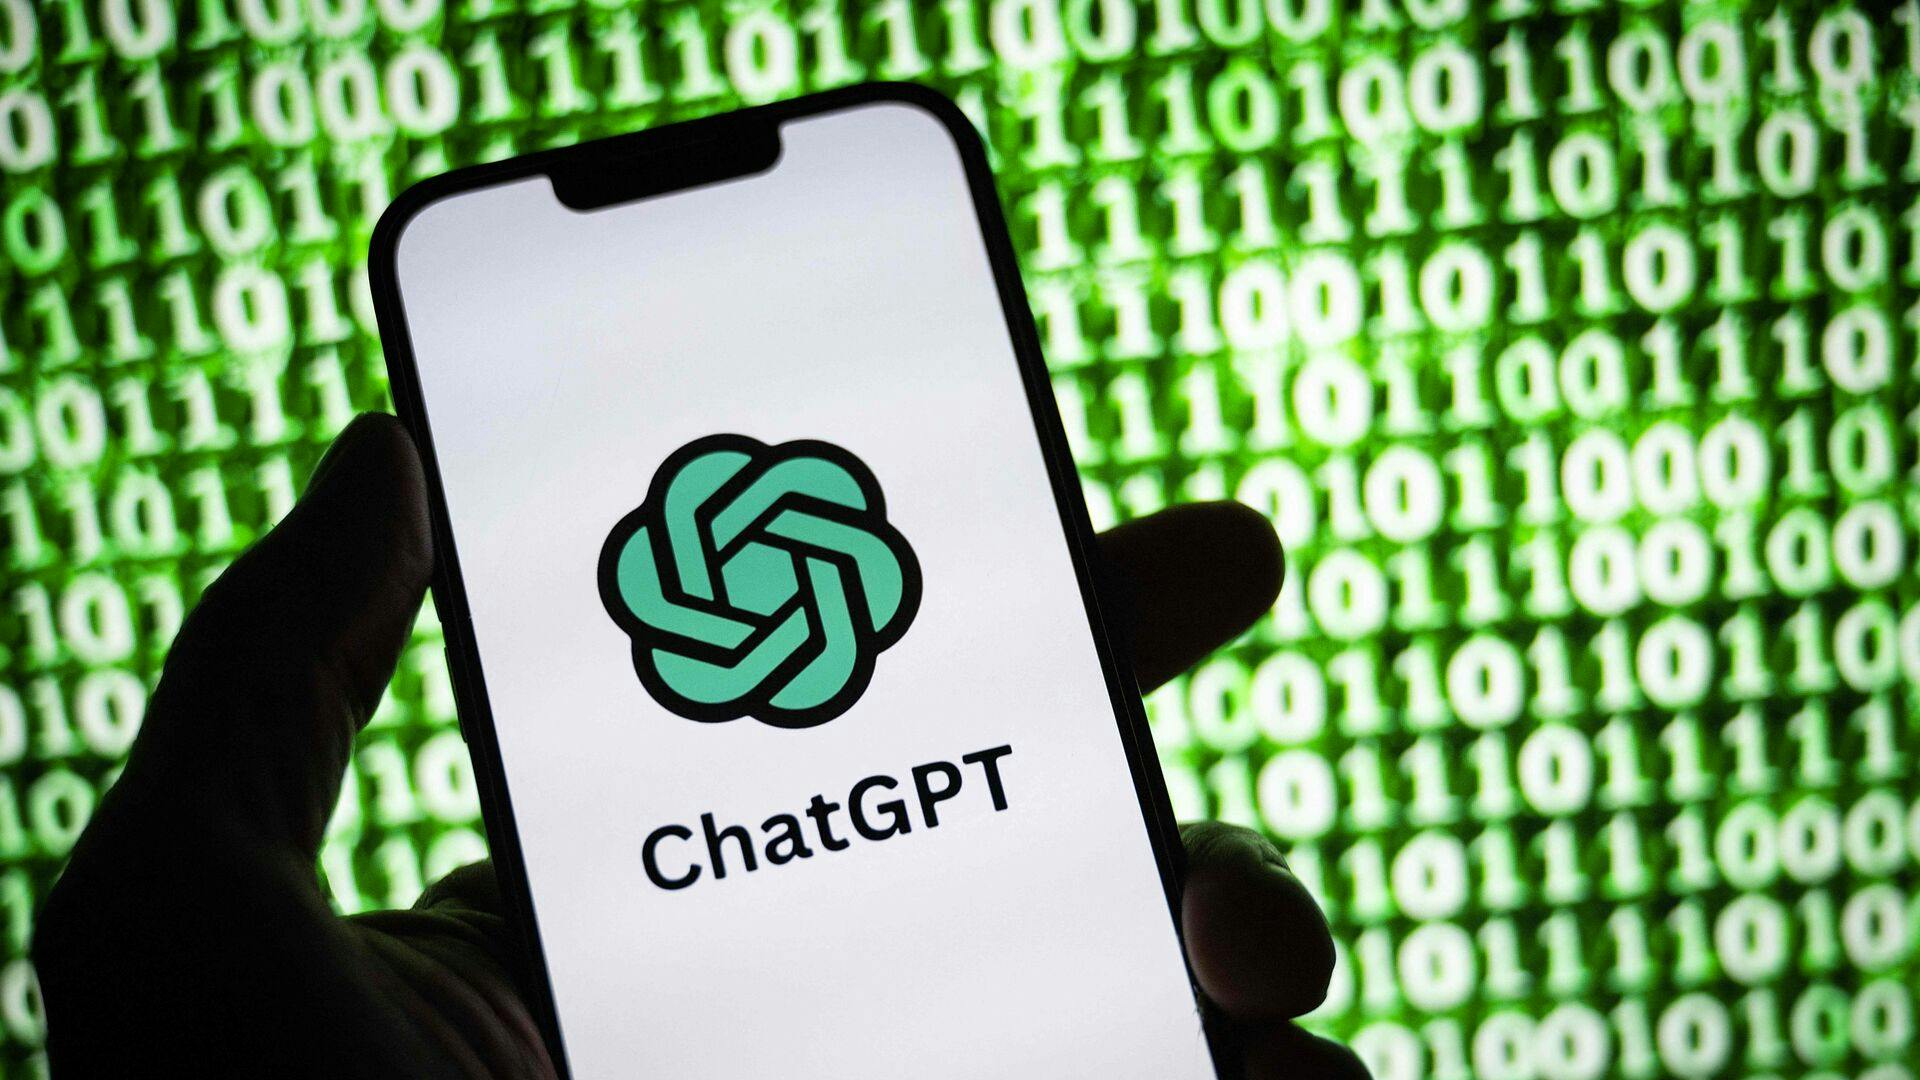 (FILES) This illustration photograph taken on October 30, 2023, shows the logo of ChatGPT, a language model-based chatbot developed by OpenAI, on a smartphone in Mulhouse, eastern France. Hundreds of staff at ChatGPT's parent company OpenAI have signed a letter threatening to leave the tech firm unless "all current board members resign, " according to US media reports on November 20, 2023. (Photo by SEBASTIEN BOZON / AFP)